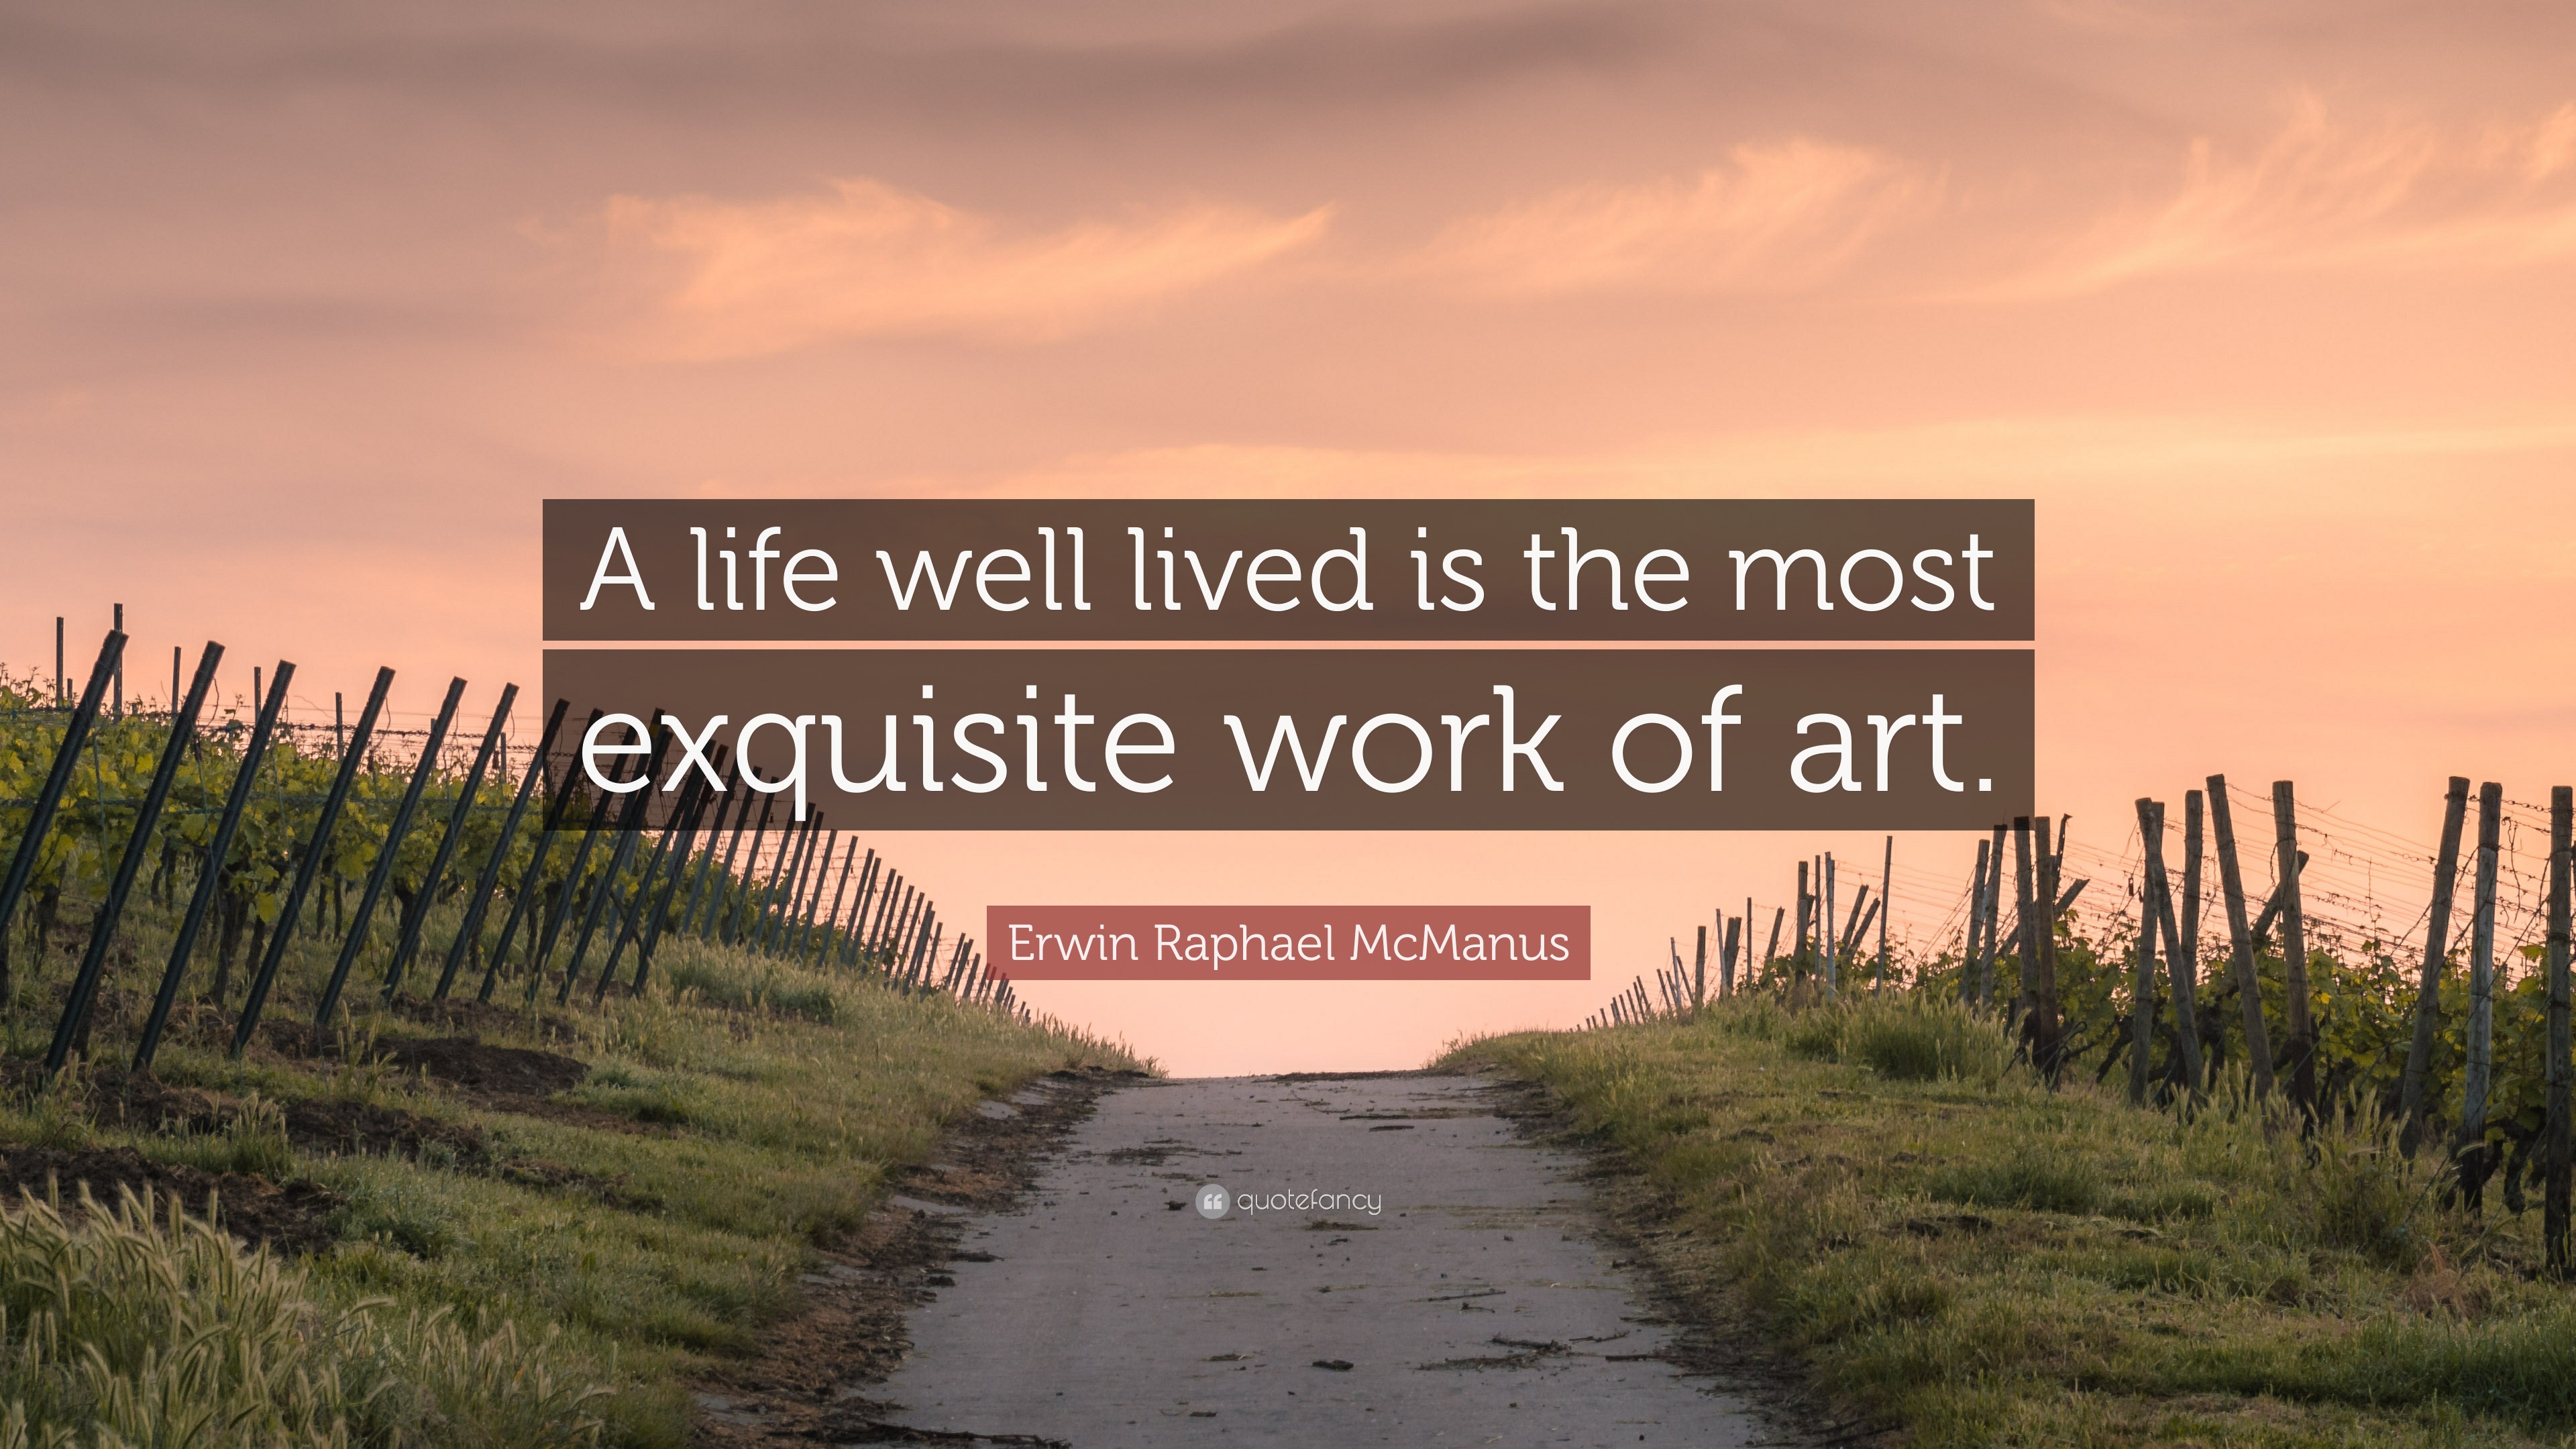 quotes on a life well lived erwin raphael mcmanus quote u201ca life well lived is the most